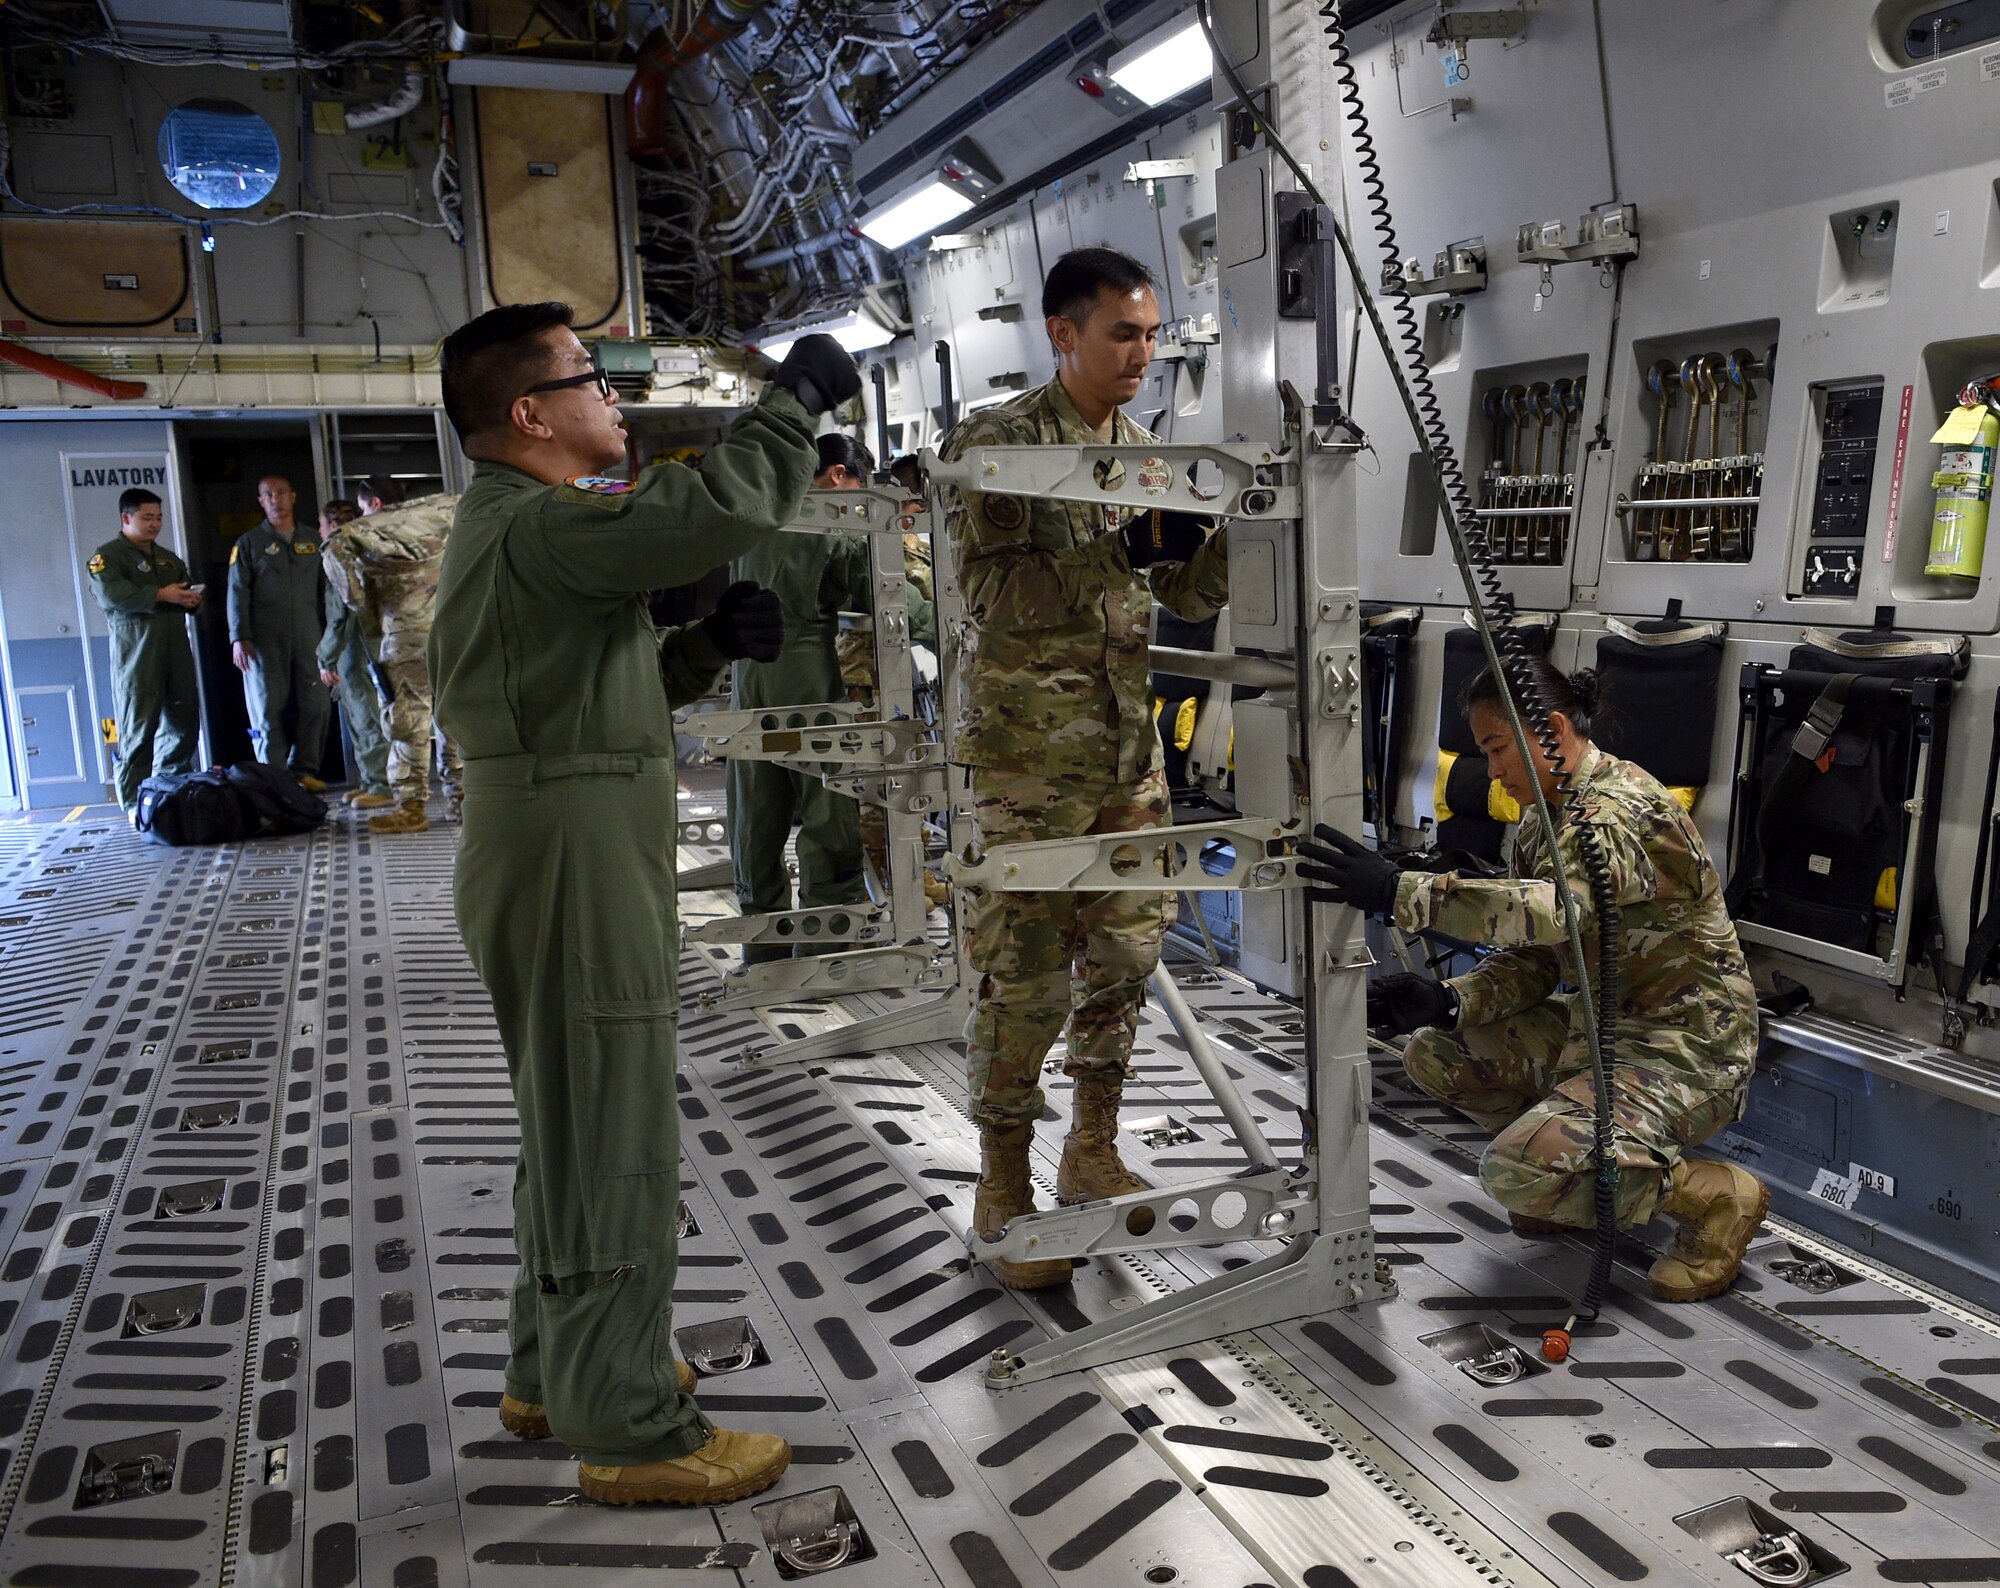 Major Joel Villavert, 613th Air Operations Center, Capt. John Penaranda, 624th Civil Engineer Squadron, and Capt. Louise Sarabosing, 624th Aeromedical Staging Squadron, prepare a C-17 for an aeromedical evacuation demonstration at Joint Base Pearl Harbor-Hickam, Hawaii, May 25, 2021. In honor of Asian American Pacific Islander Heritage Month, active duty, Air Force Reserve, and Air National Guard Airmen of Asian American and Pacific Islander descent came together to demonstrate Air Force capabilities for University of Hawaii ROTC cadets. (U.S. Air Force photo by 1st Lt. Amber R. Kelly-Herard)